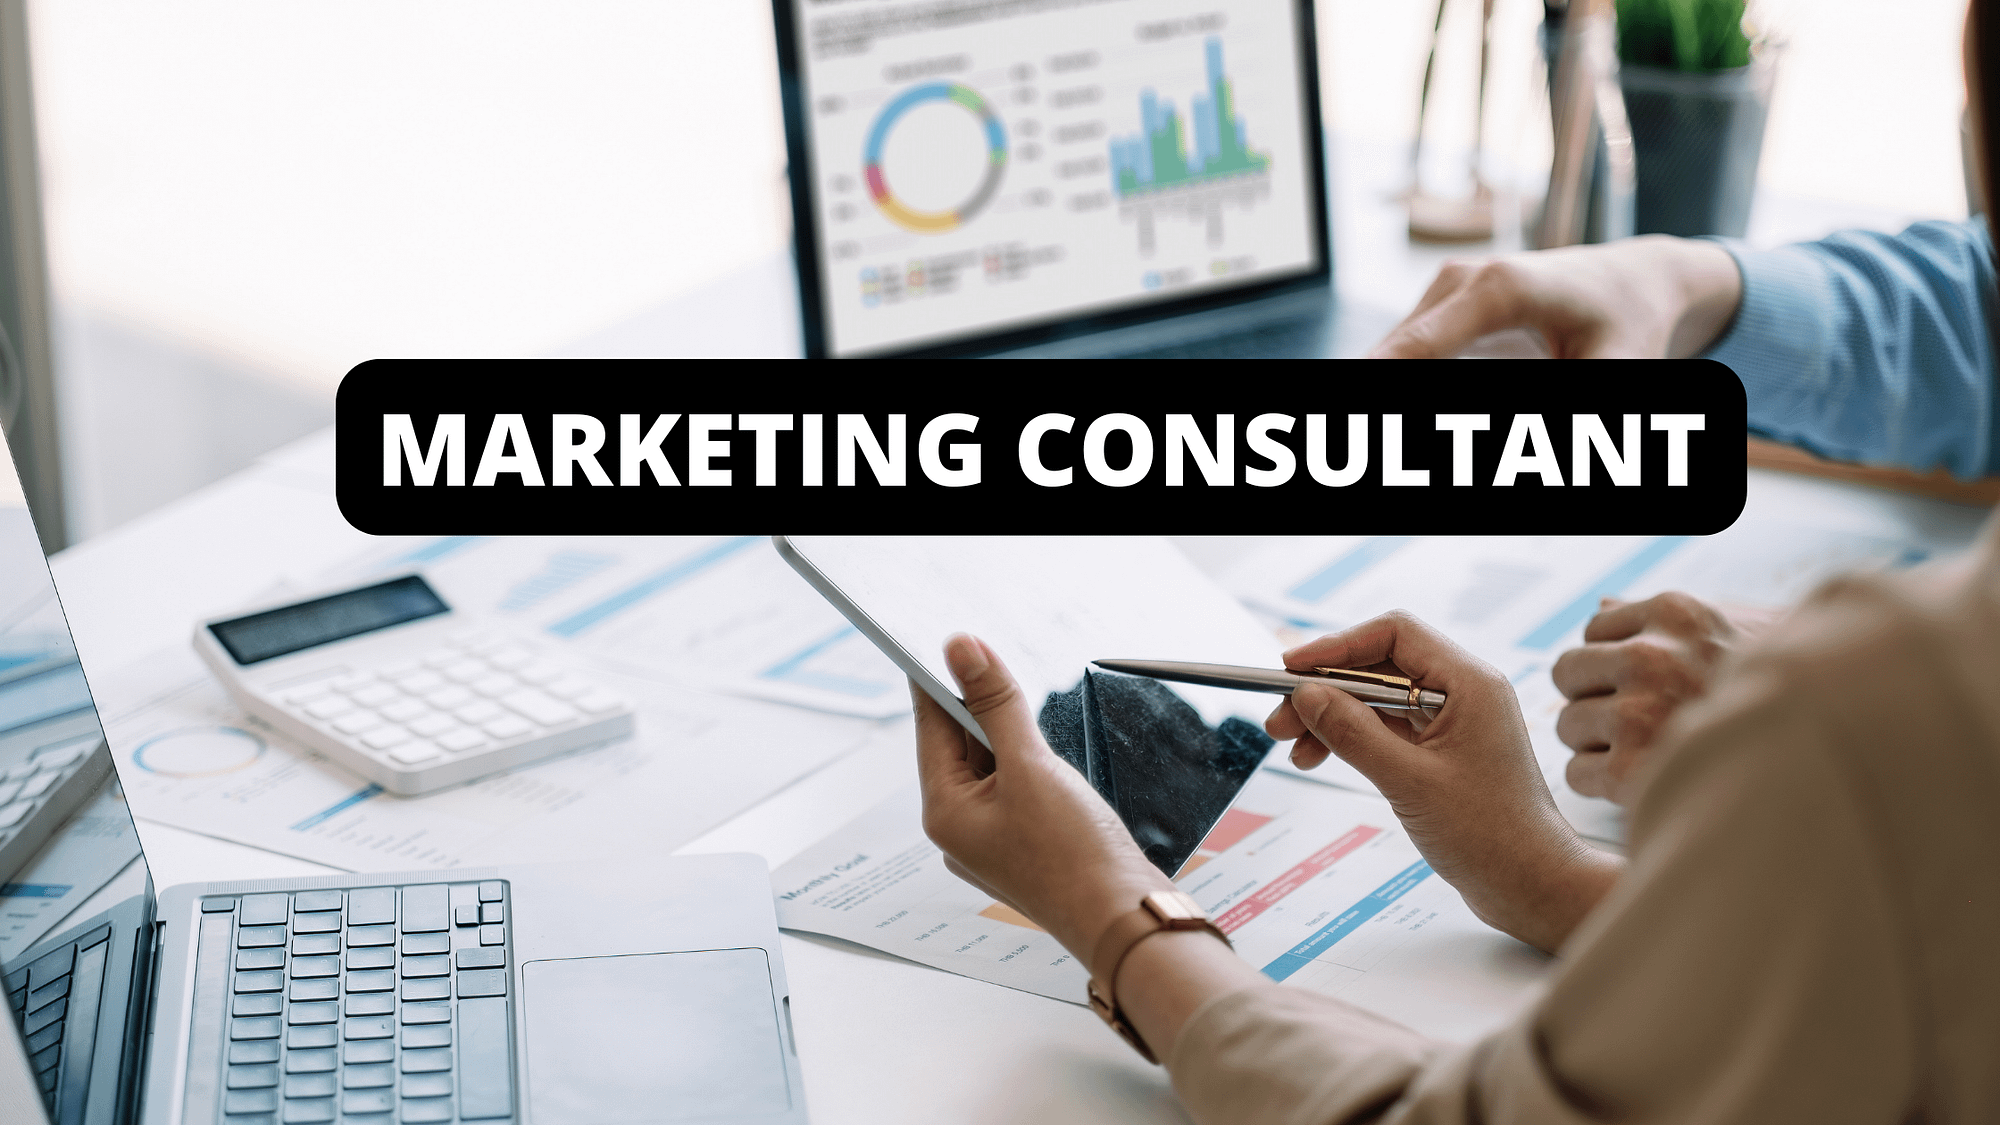 The Benefits of Being a Marketing Consultant